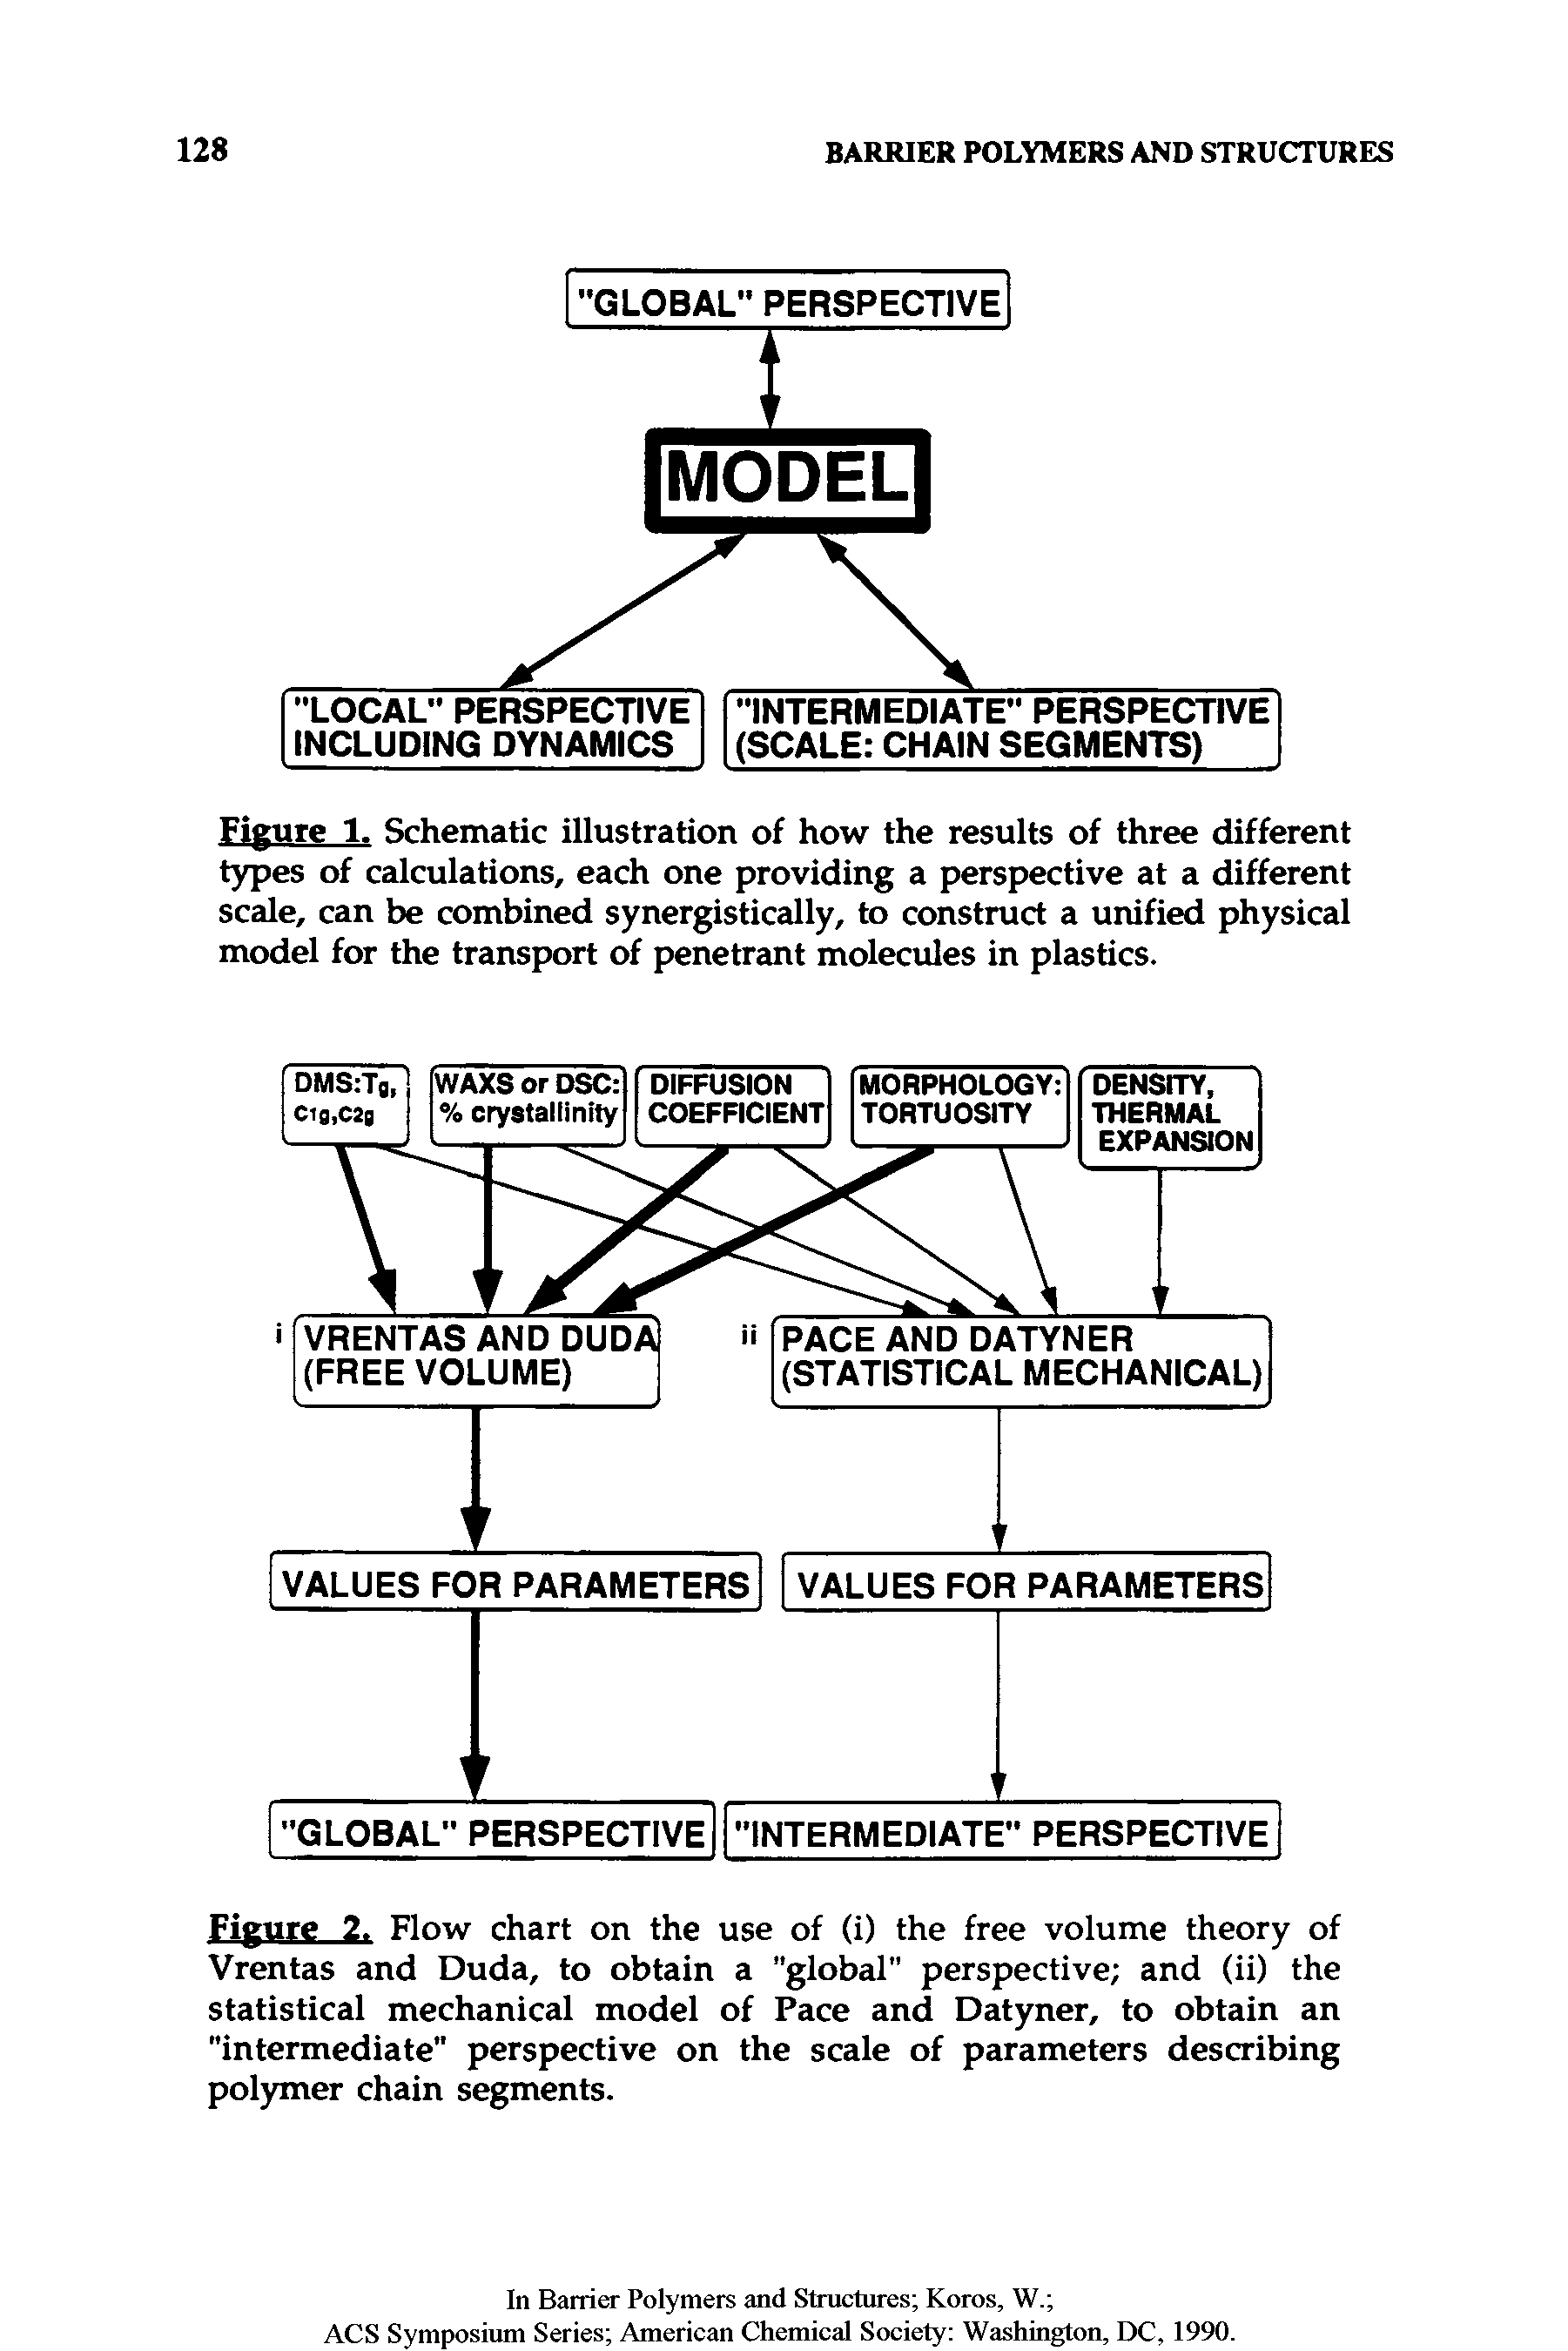 Figure 2. Flow chart on the use of (i) the free volume theory of Vrentas and Duda, to obtain a "global perspective and (ii) the statistical mechanical model of Pace and Datyner, to obtain an "intermediate perspective on the scale of parameters describing polymer chain segments.